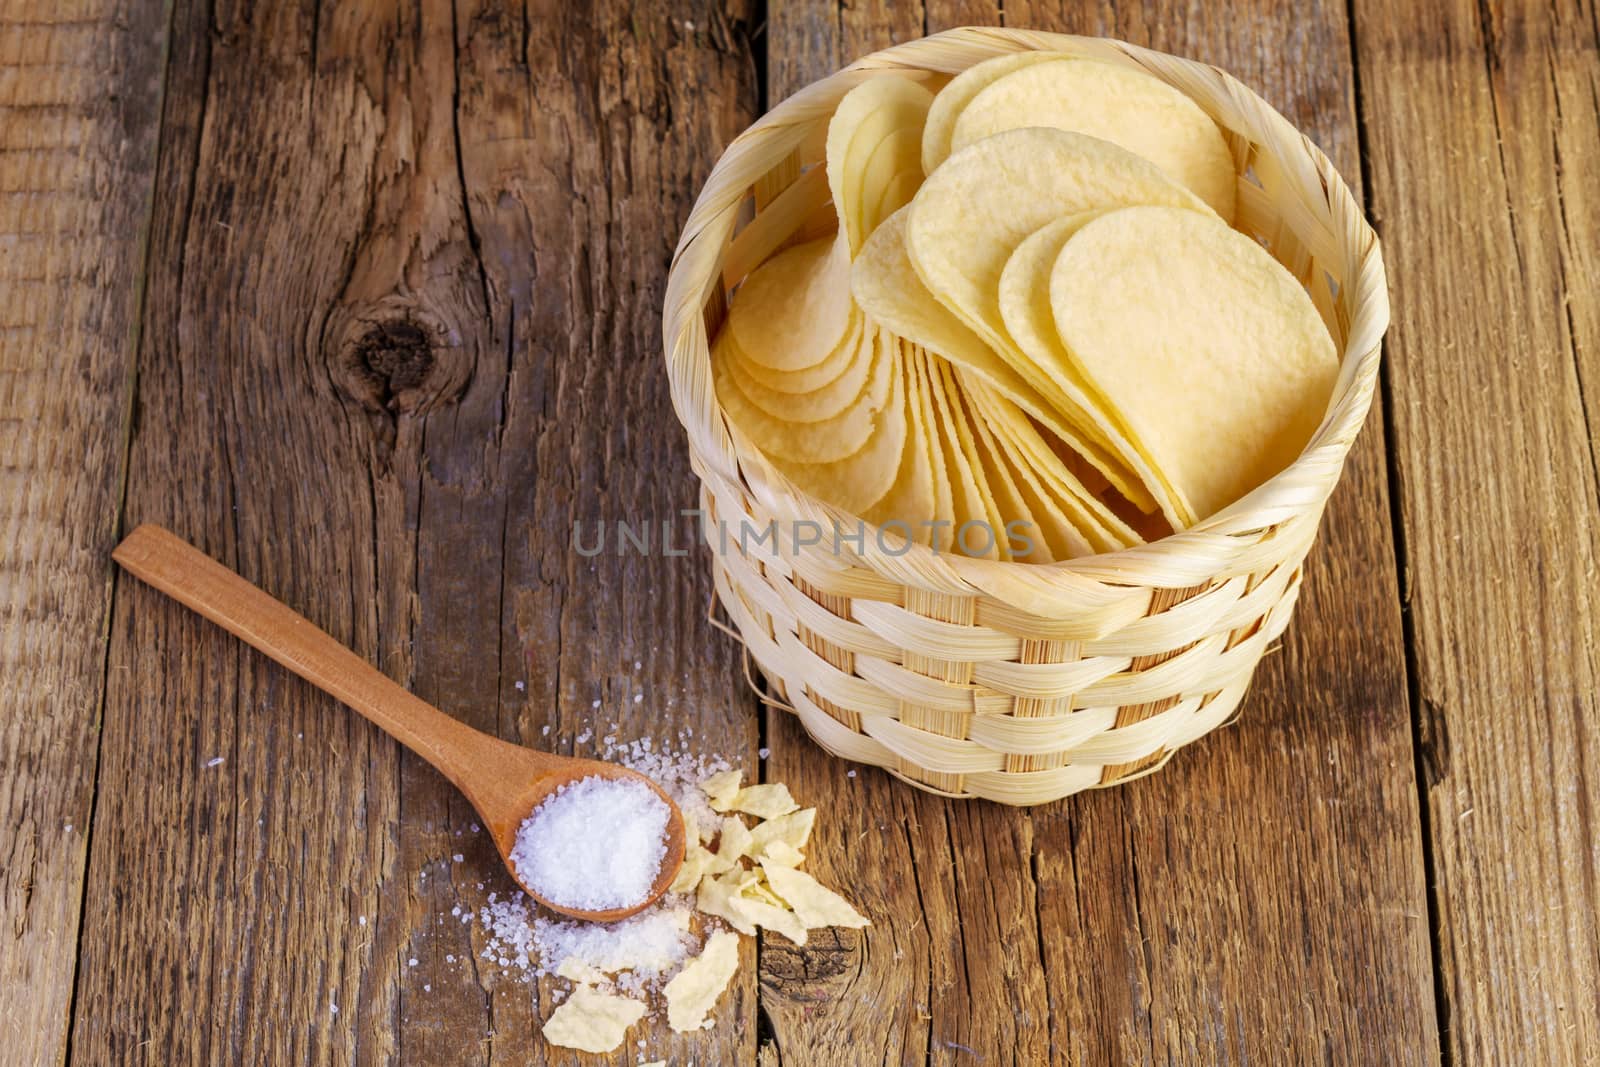 potato chips in a wooden basket and spoon on wooden table